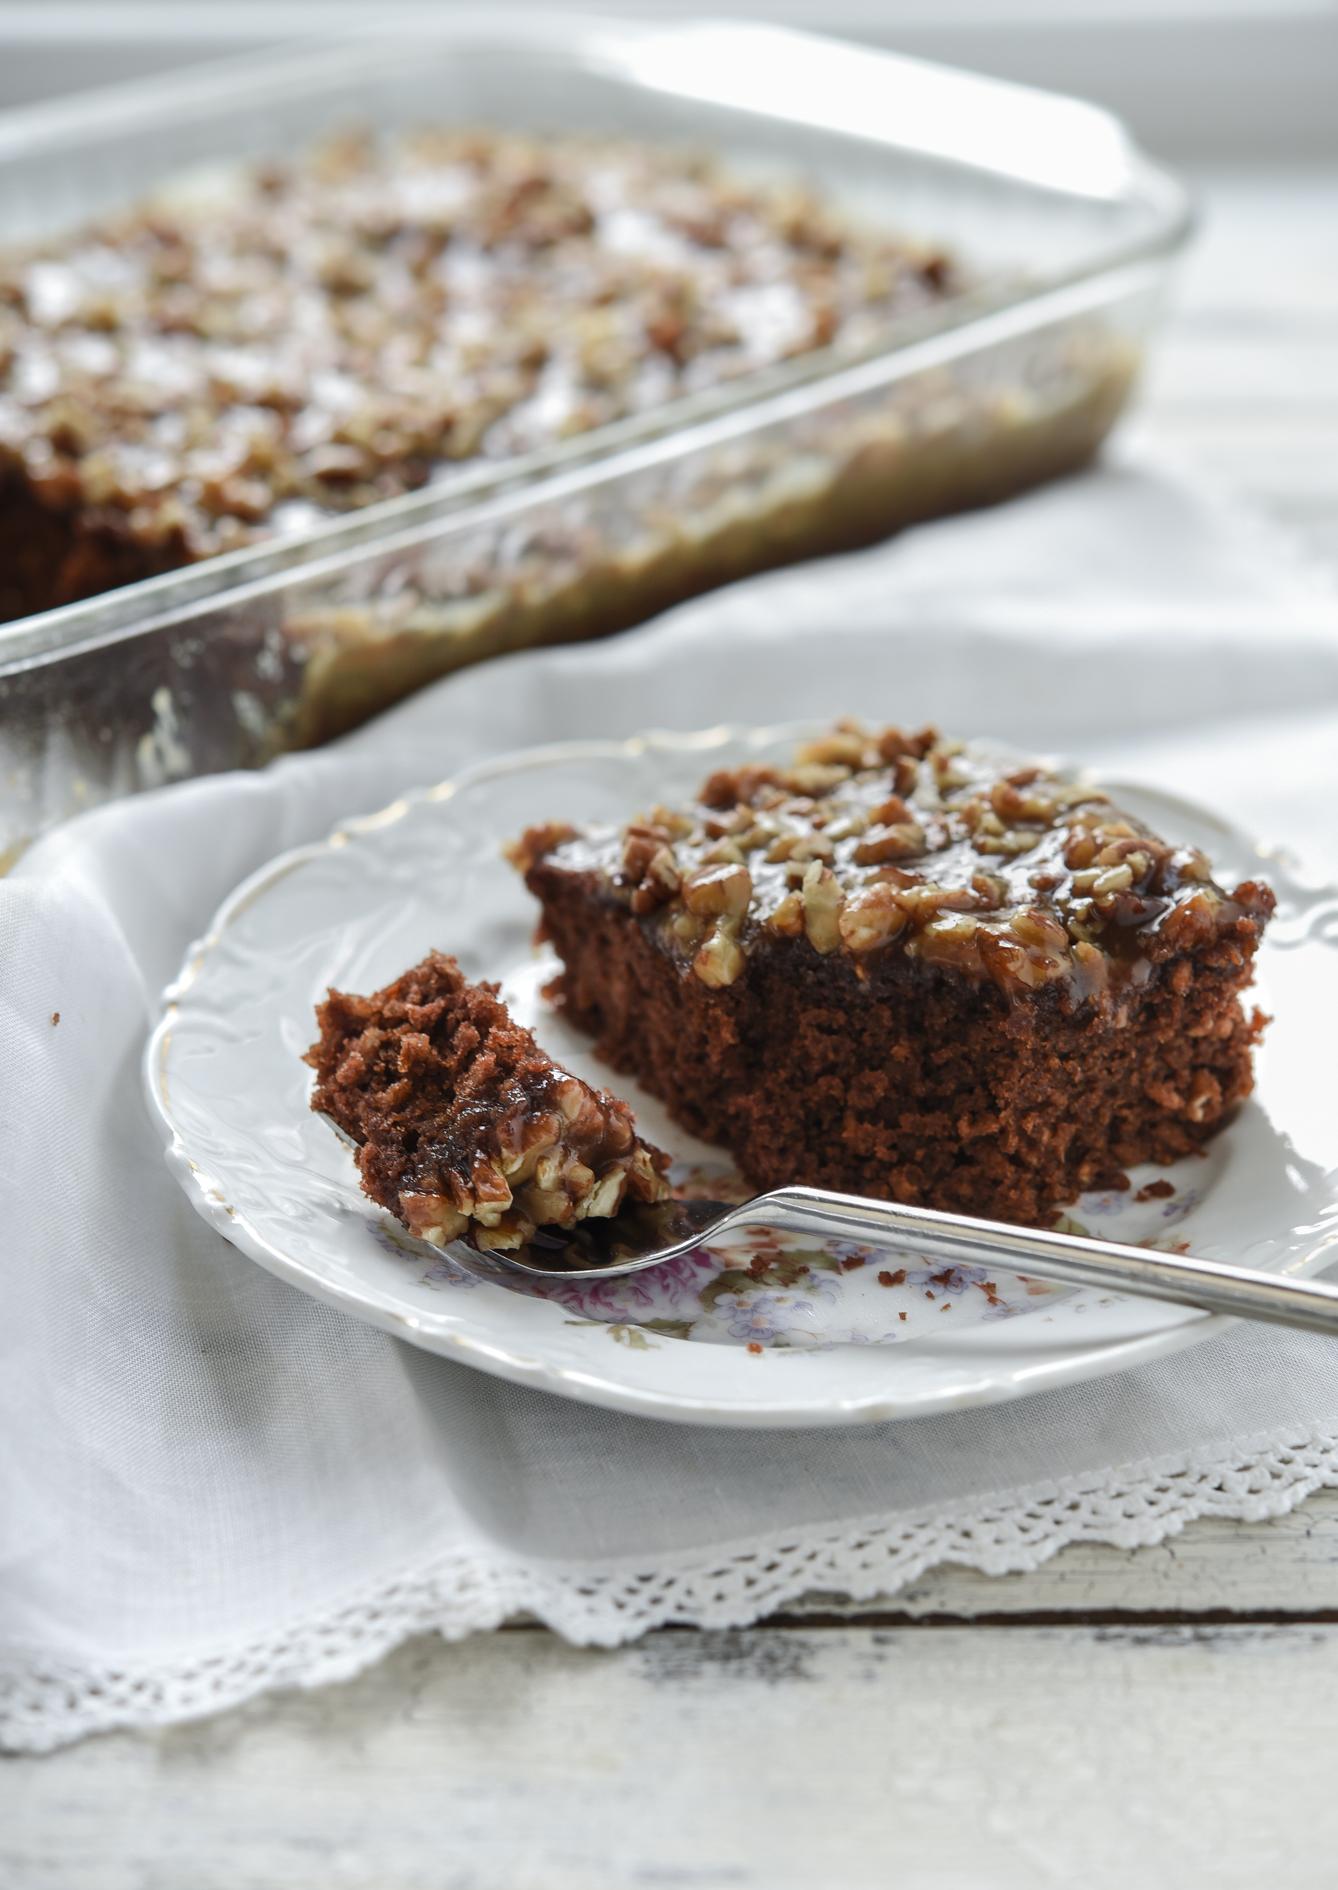  Soft and moist date oatmeal cake topped with decadent mocha frosting.